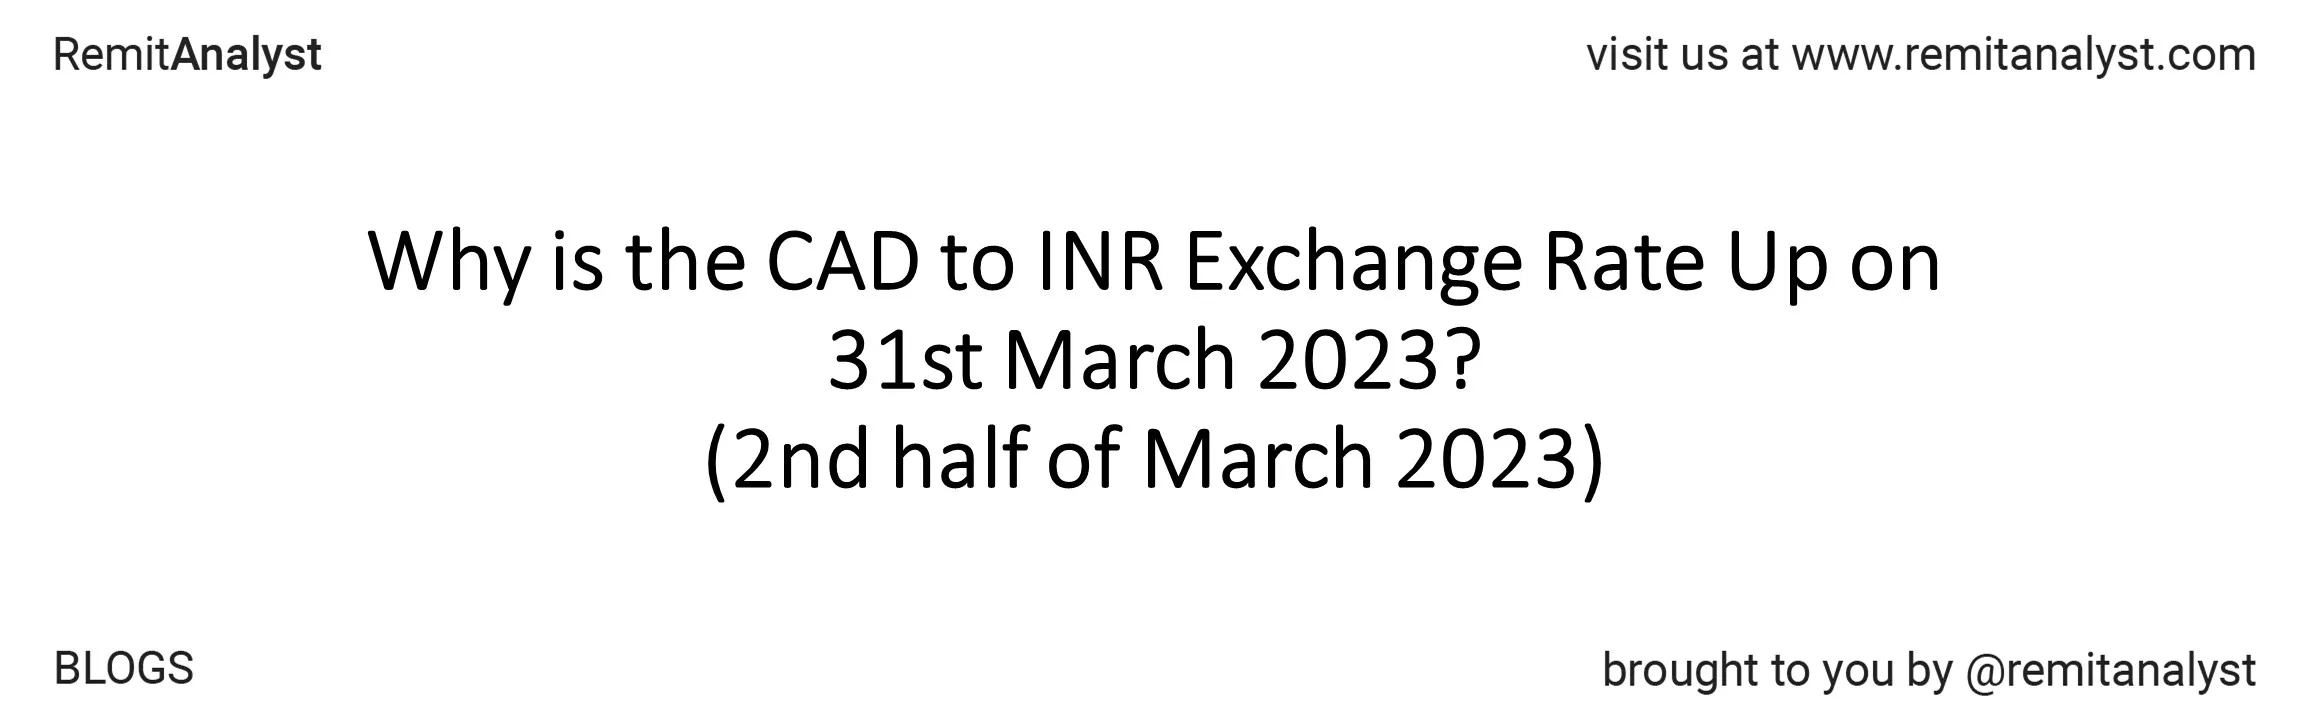 cad-to-inr-exchange-rate-from-16-mar-2023-to-31-mar-2023-title